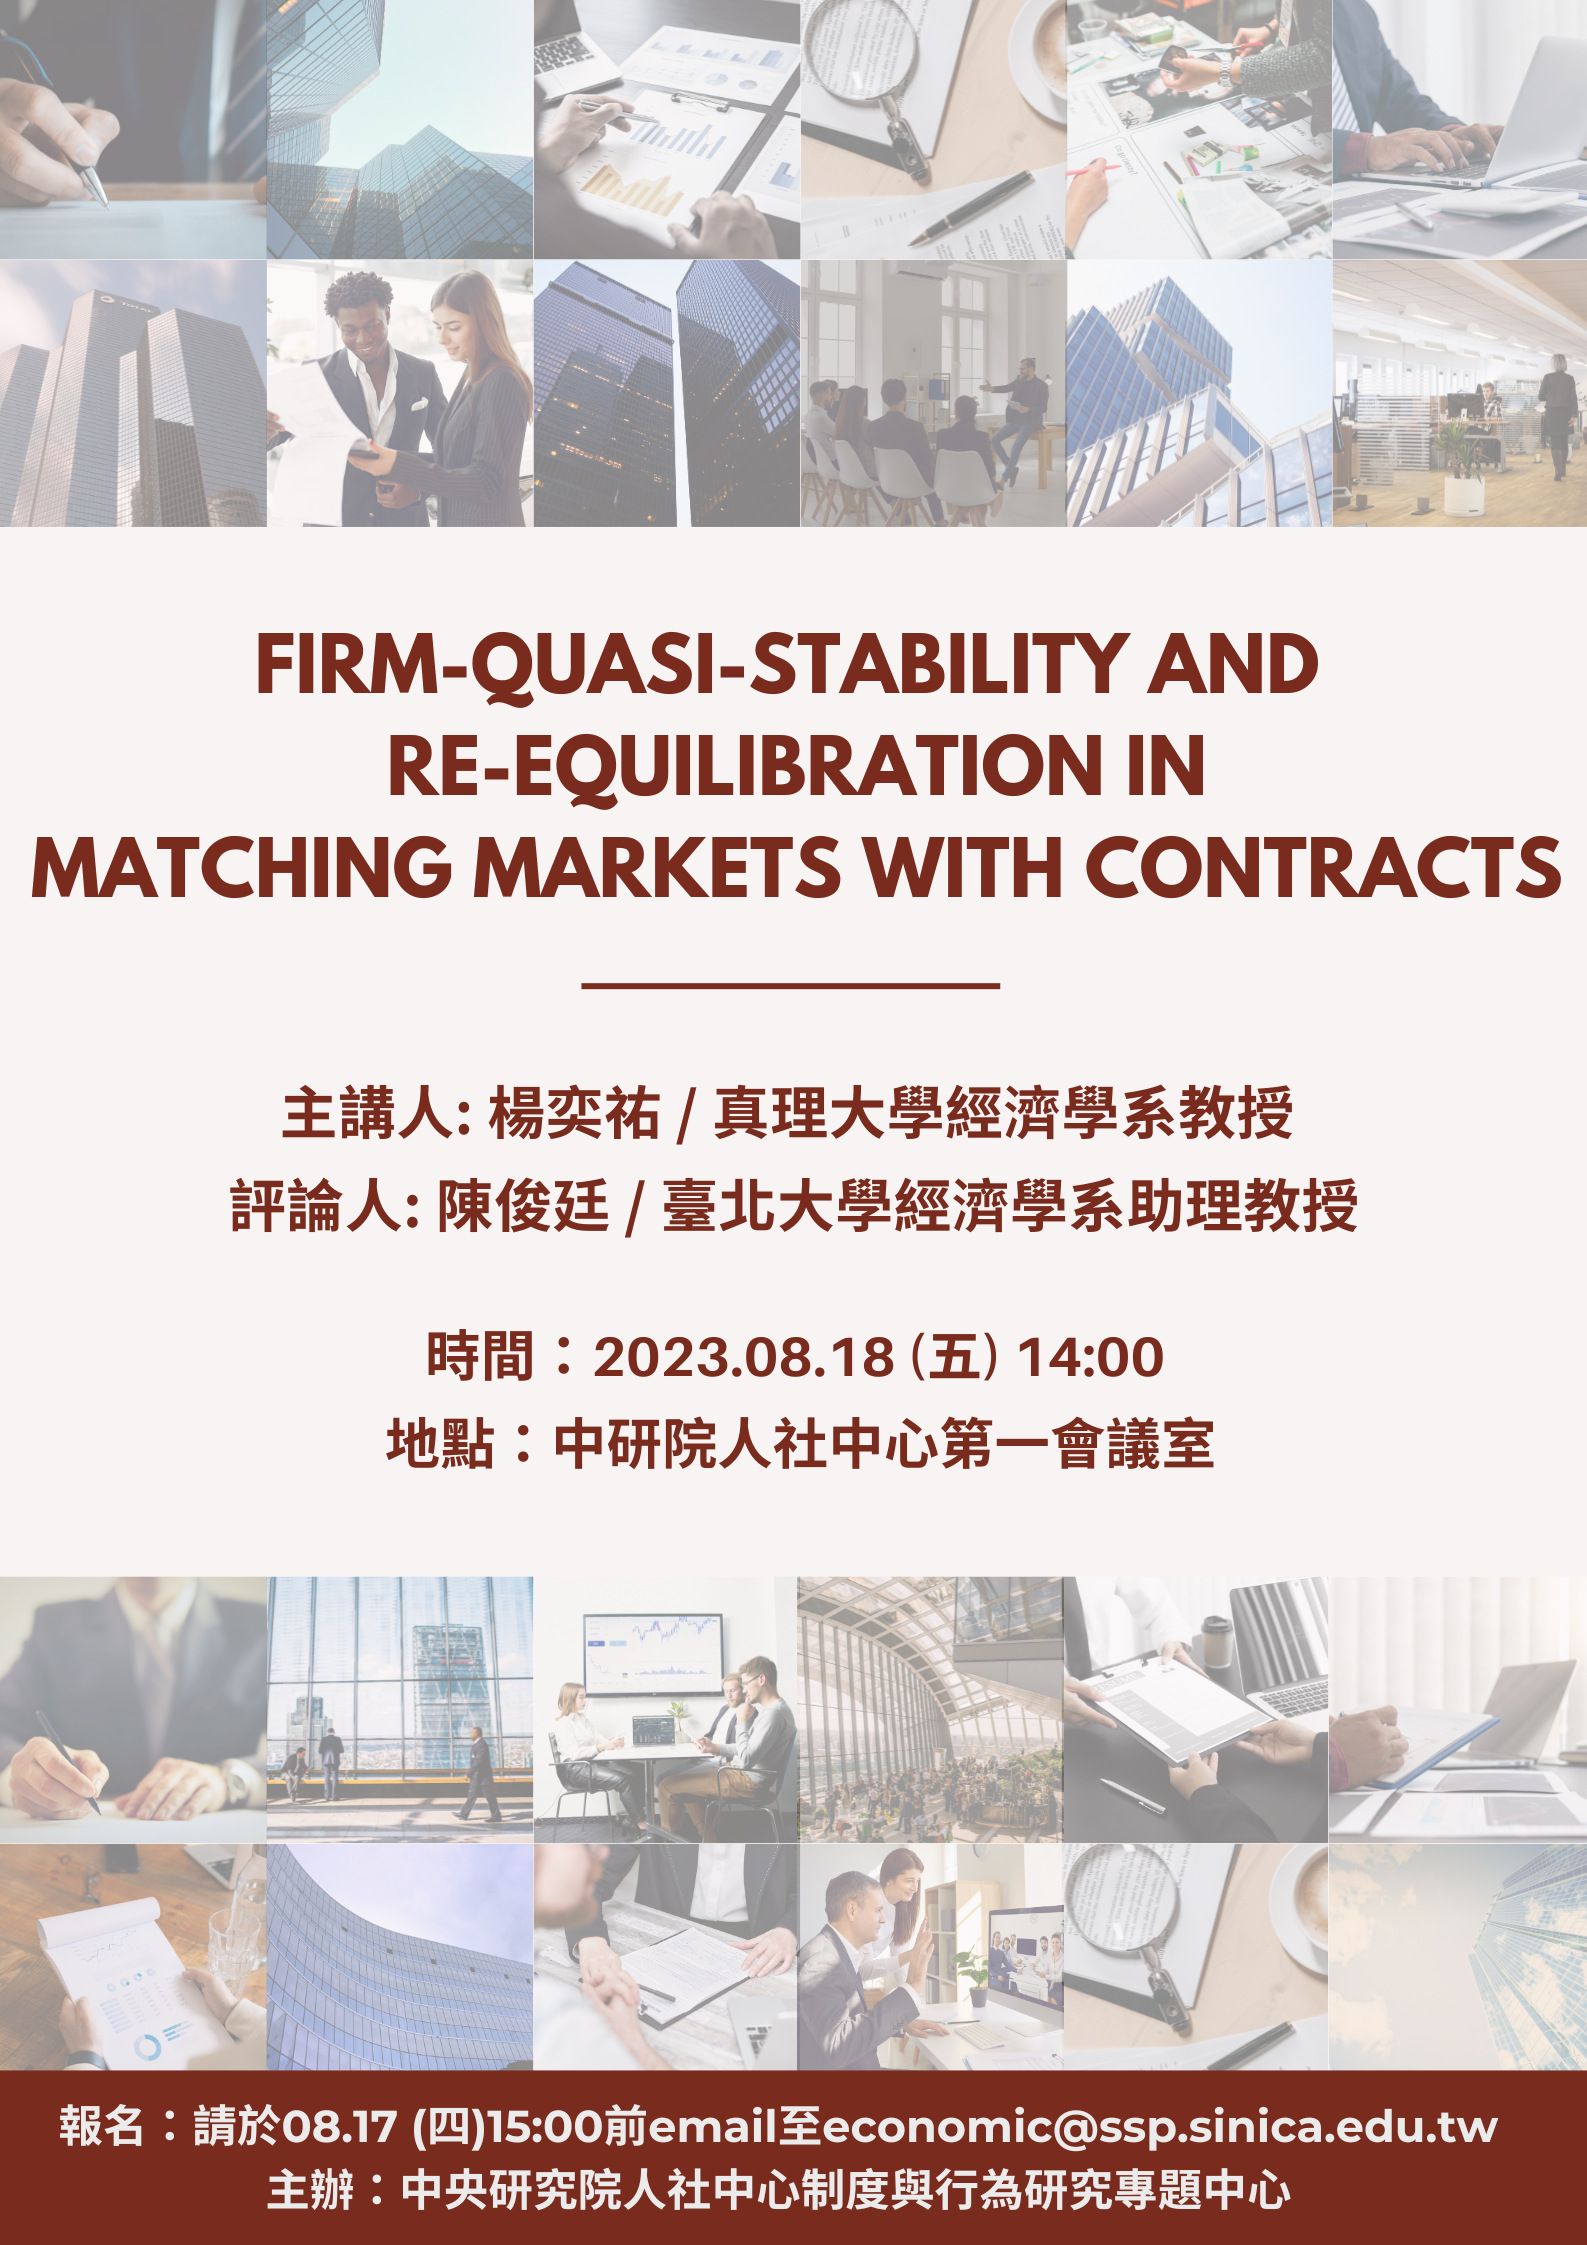 Firm-quasi-stability_and_re-equilibration_in_matching_markets_with_contracts.png